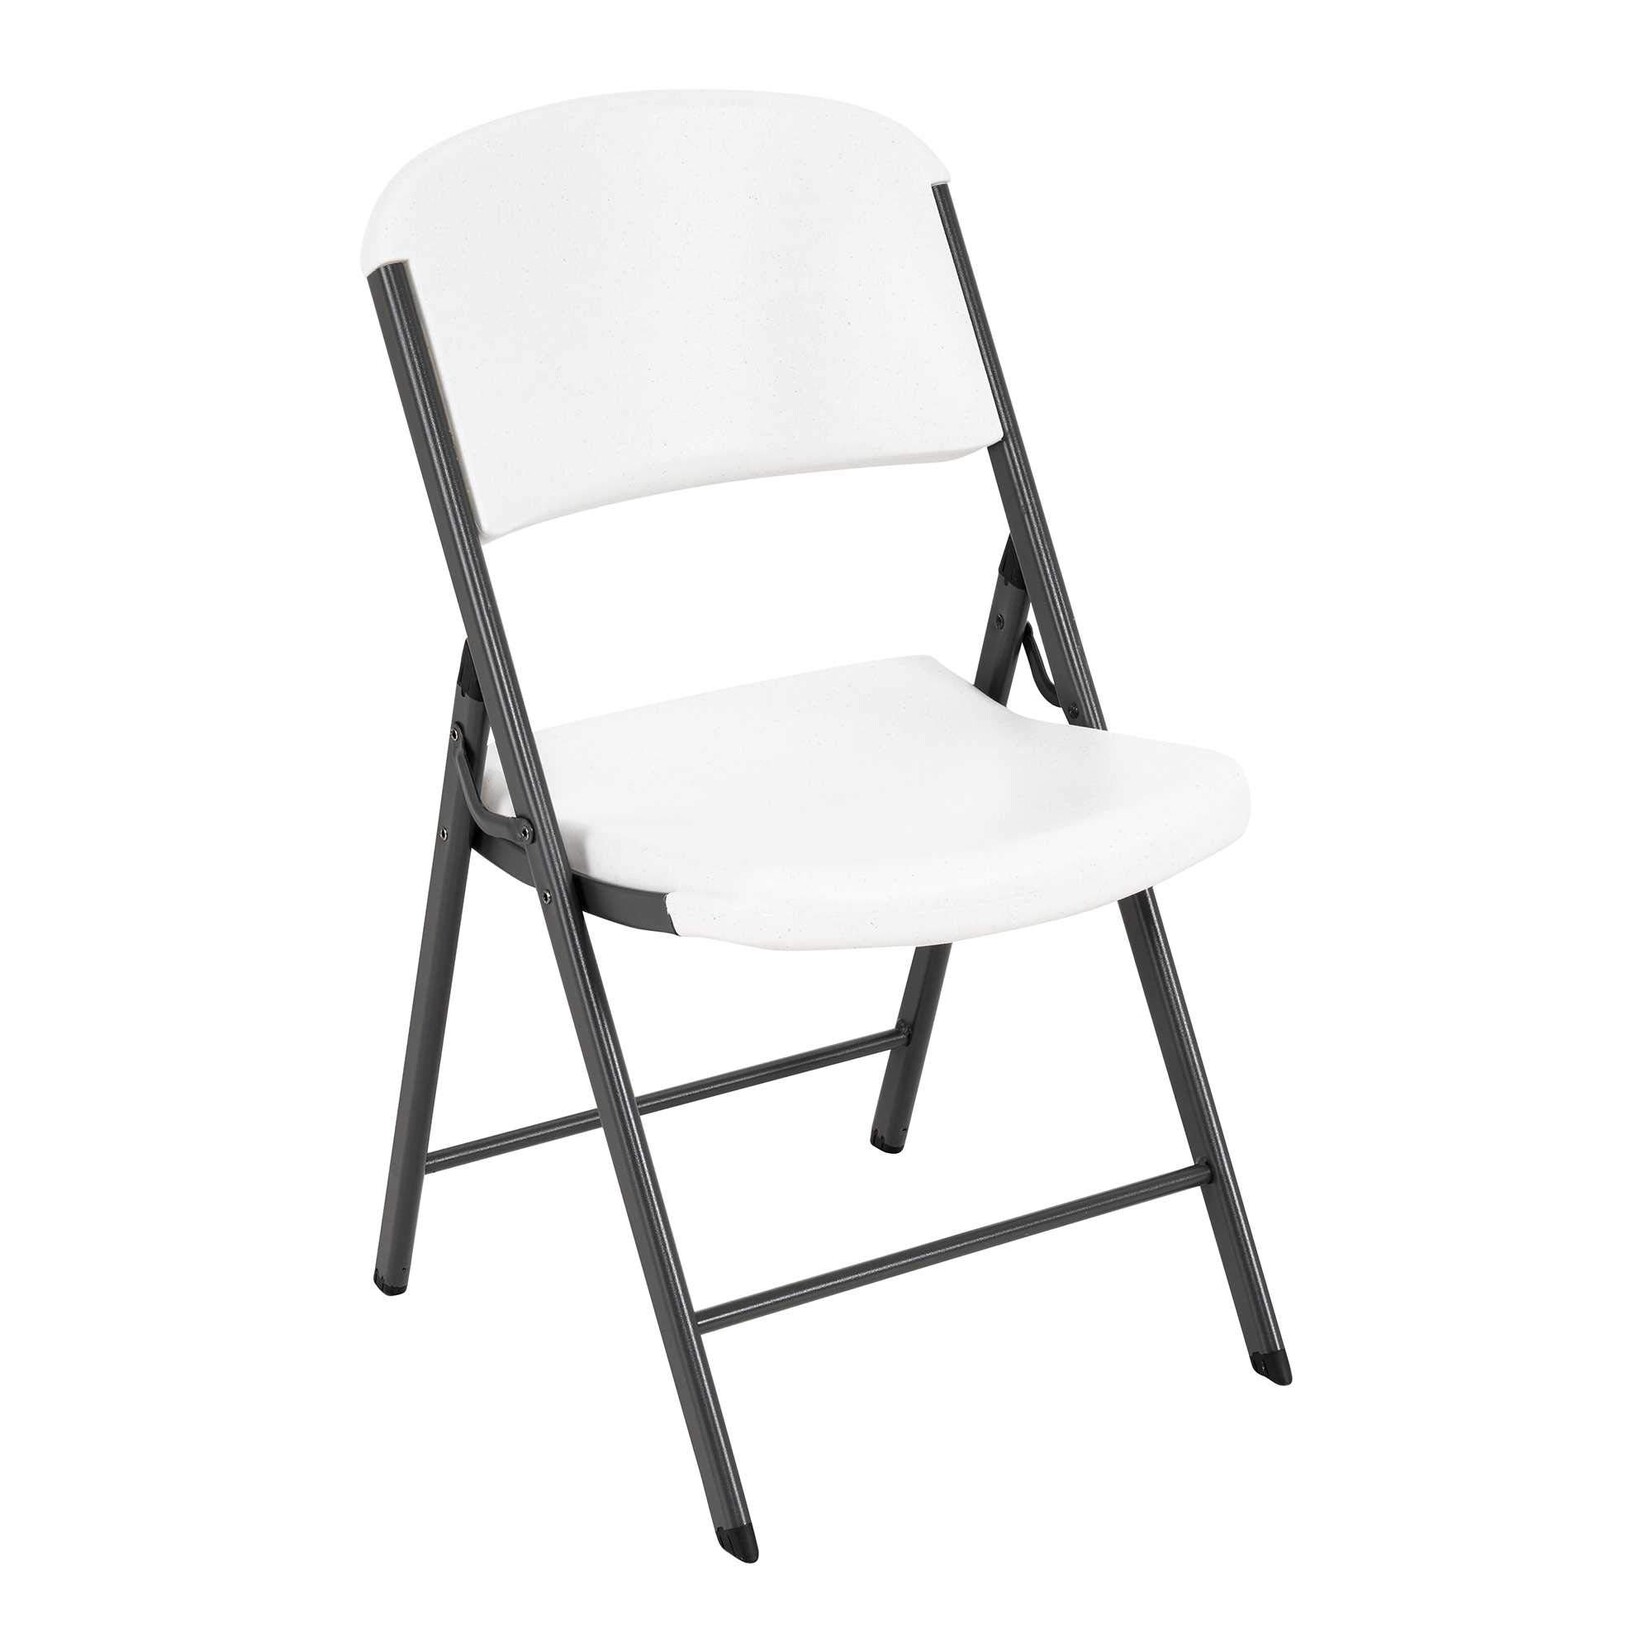 Lifetime Commercial Folding Chairs, 1 pc